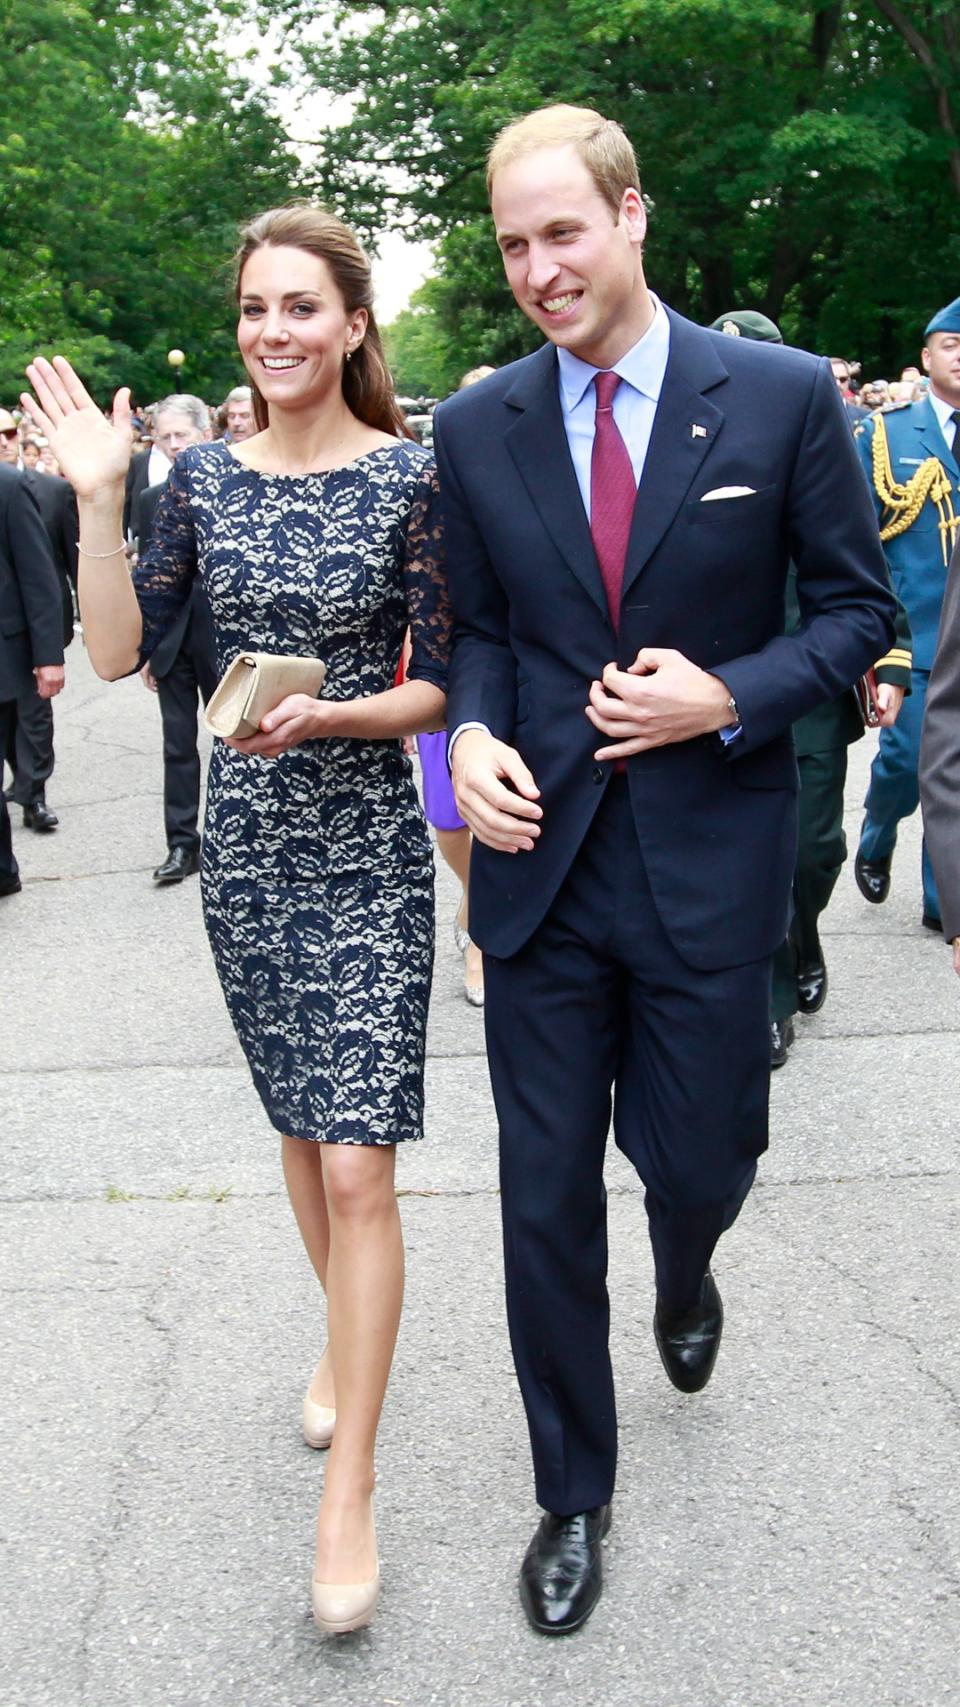 Prince William and Kate Middleton’s first tour